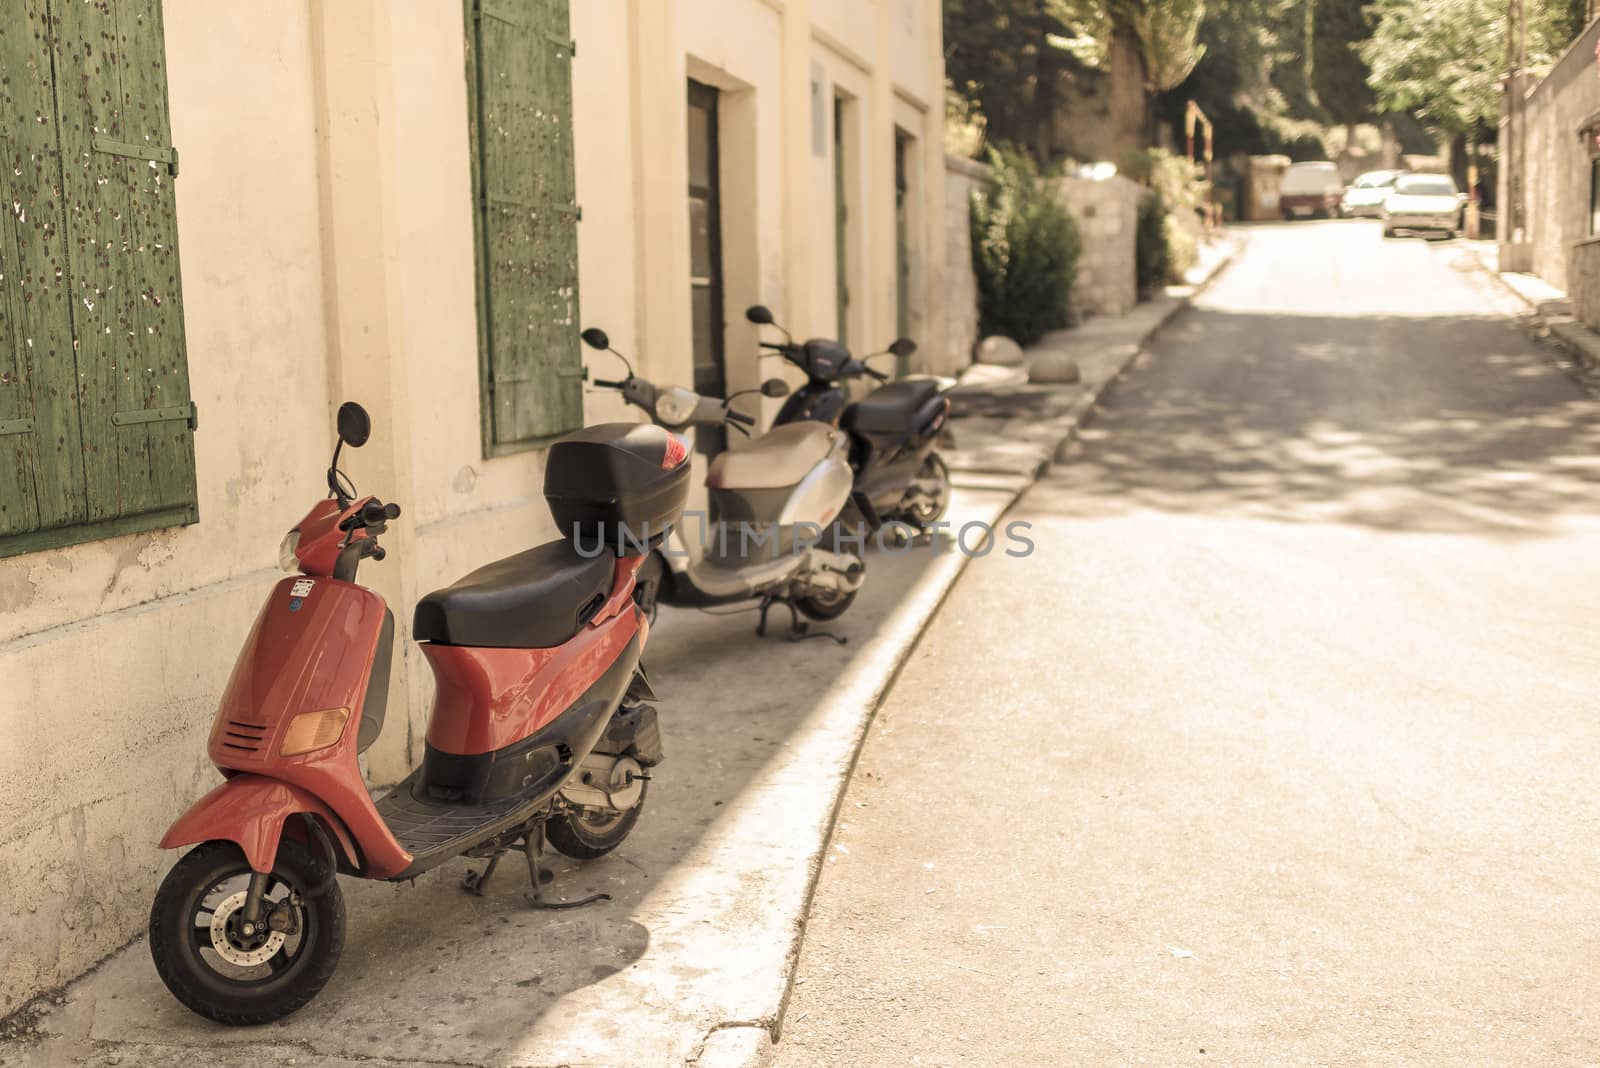 Three scooters parking in empty street in medditaerenian country, visible building with green shutters.